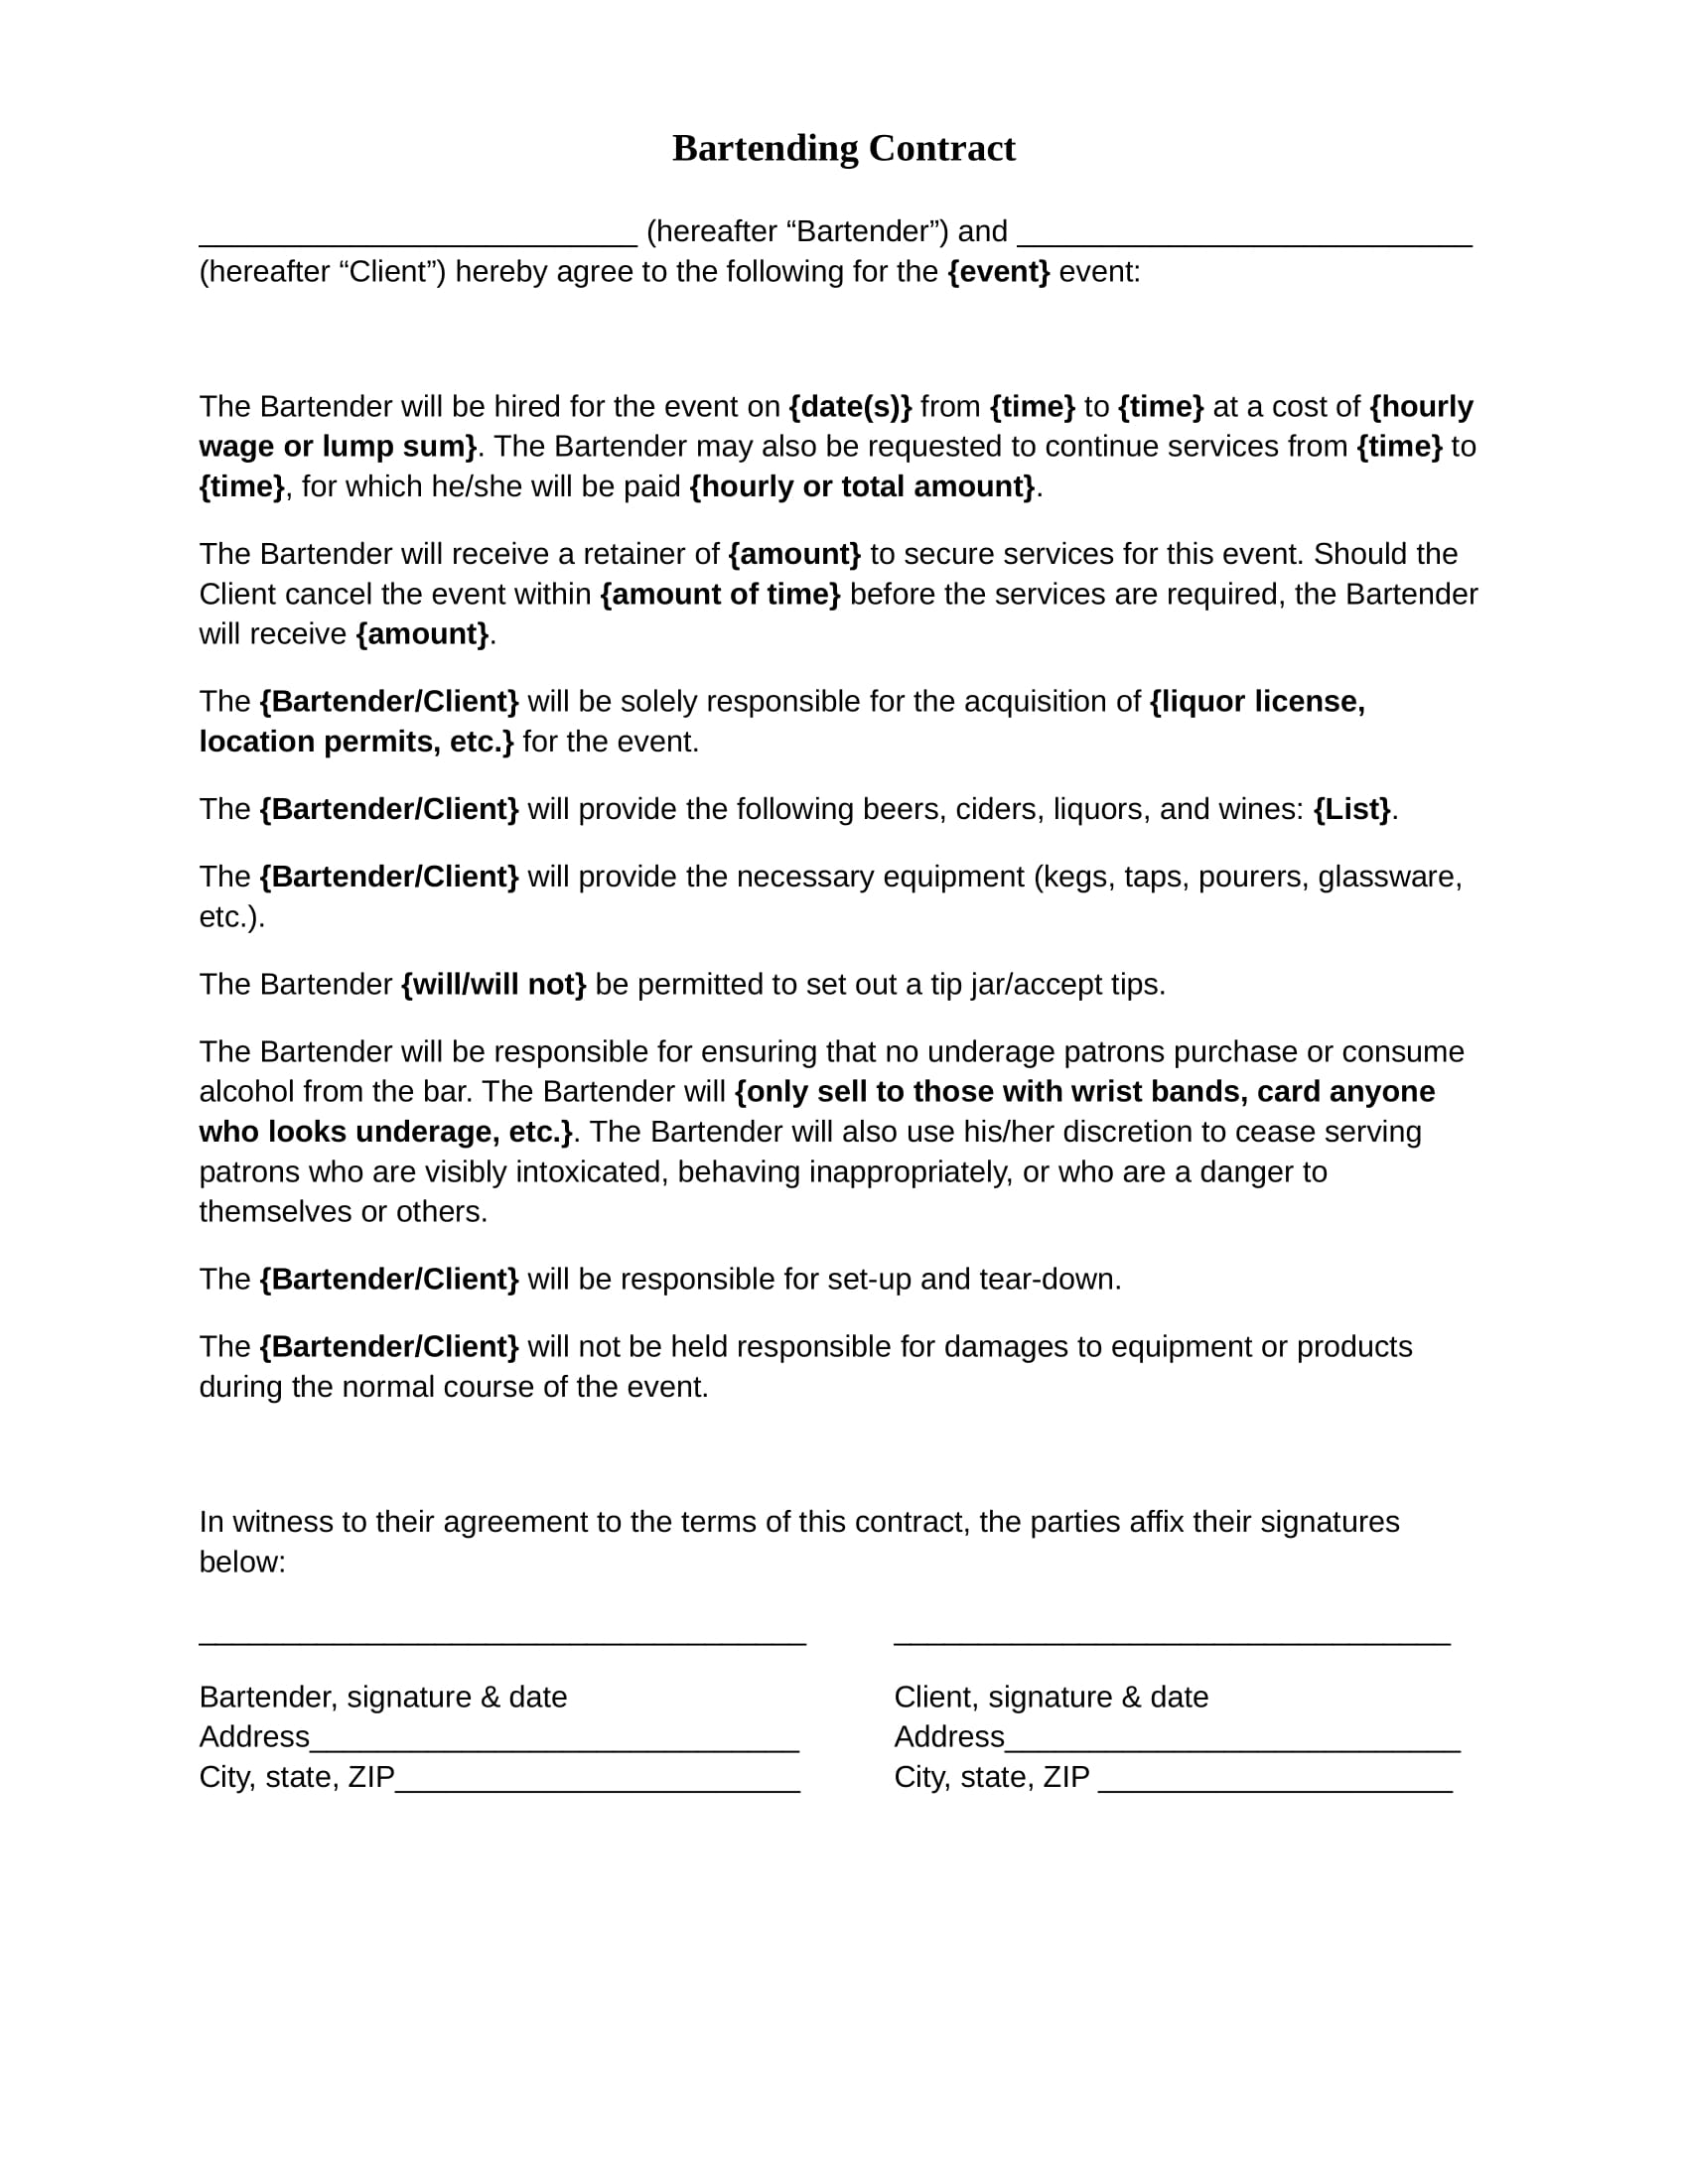 bartending contract form in doc 1